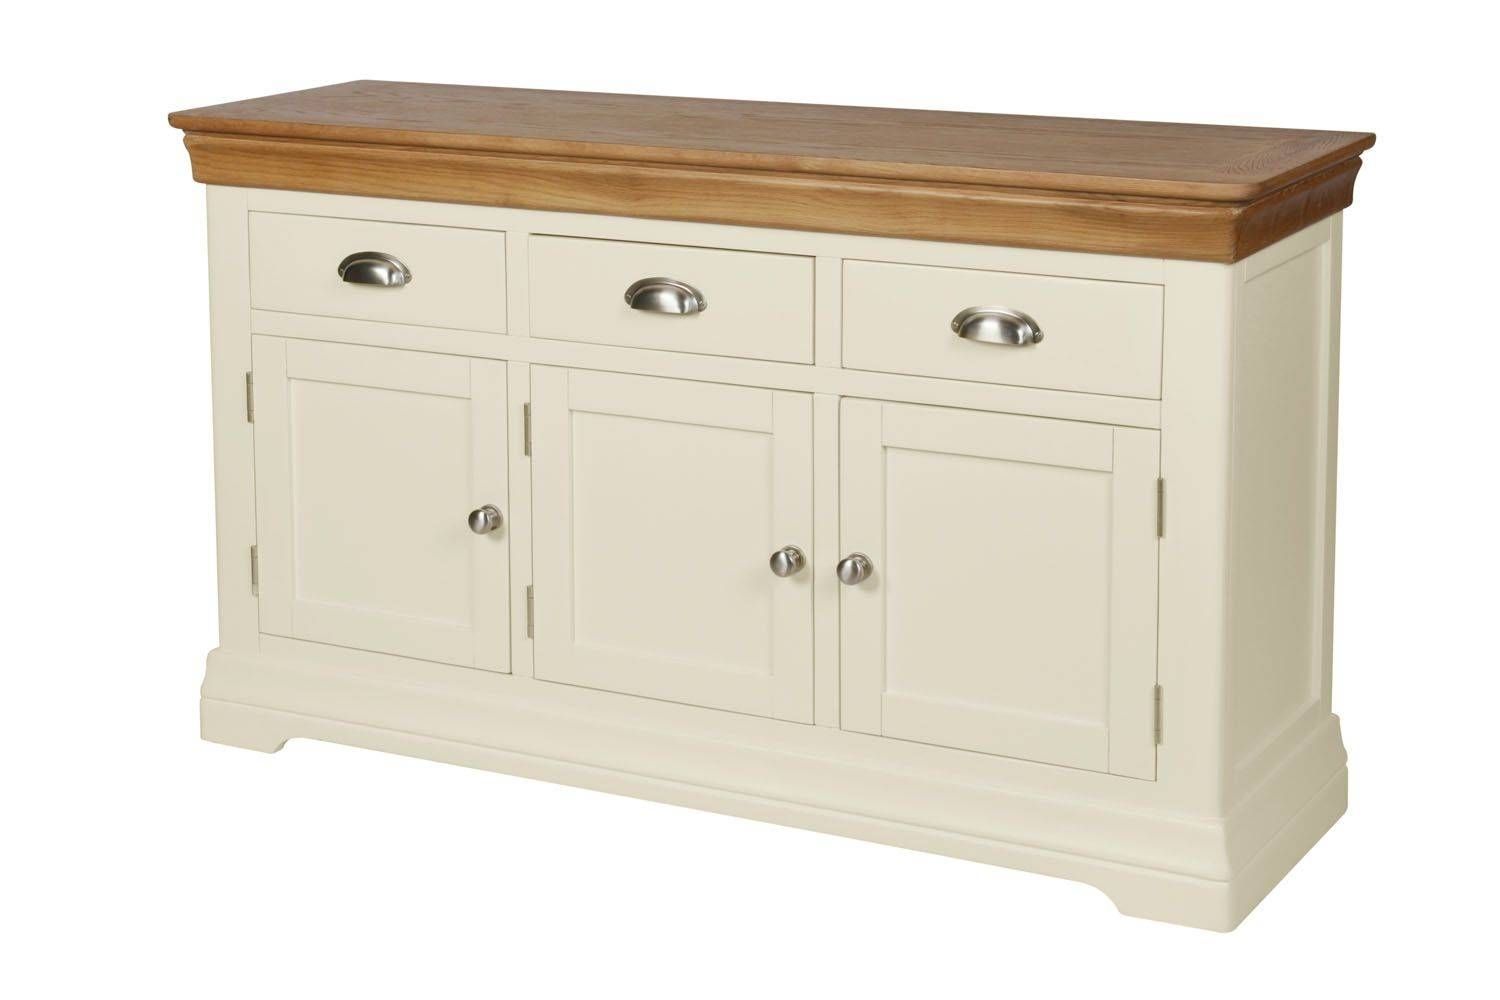 Country Oak Farmhouse 140cm Cream Painted Sideboard Inside Recent Farmhouse Sideboards (View 14 of 15)